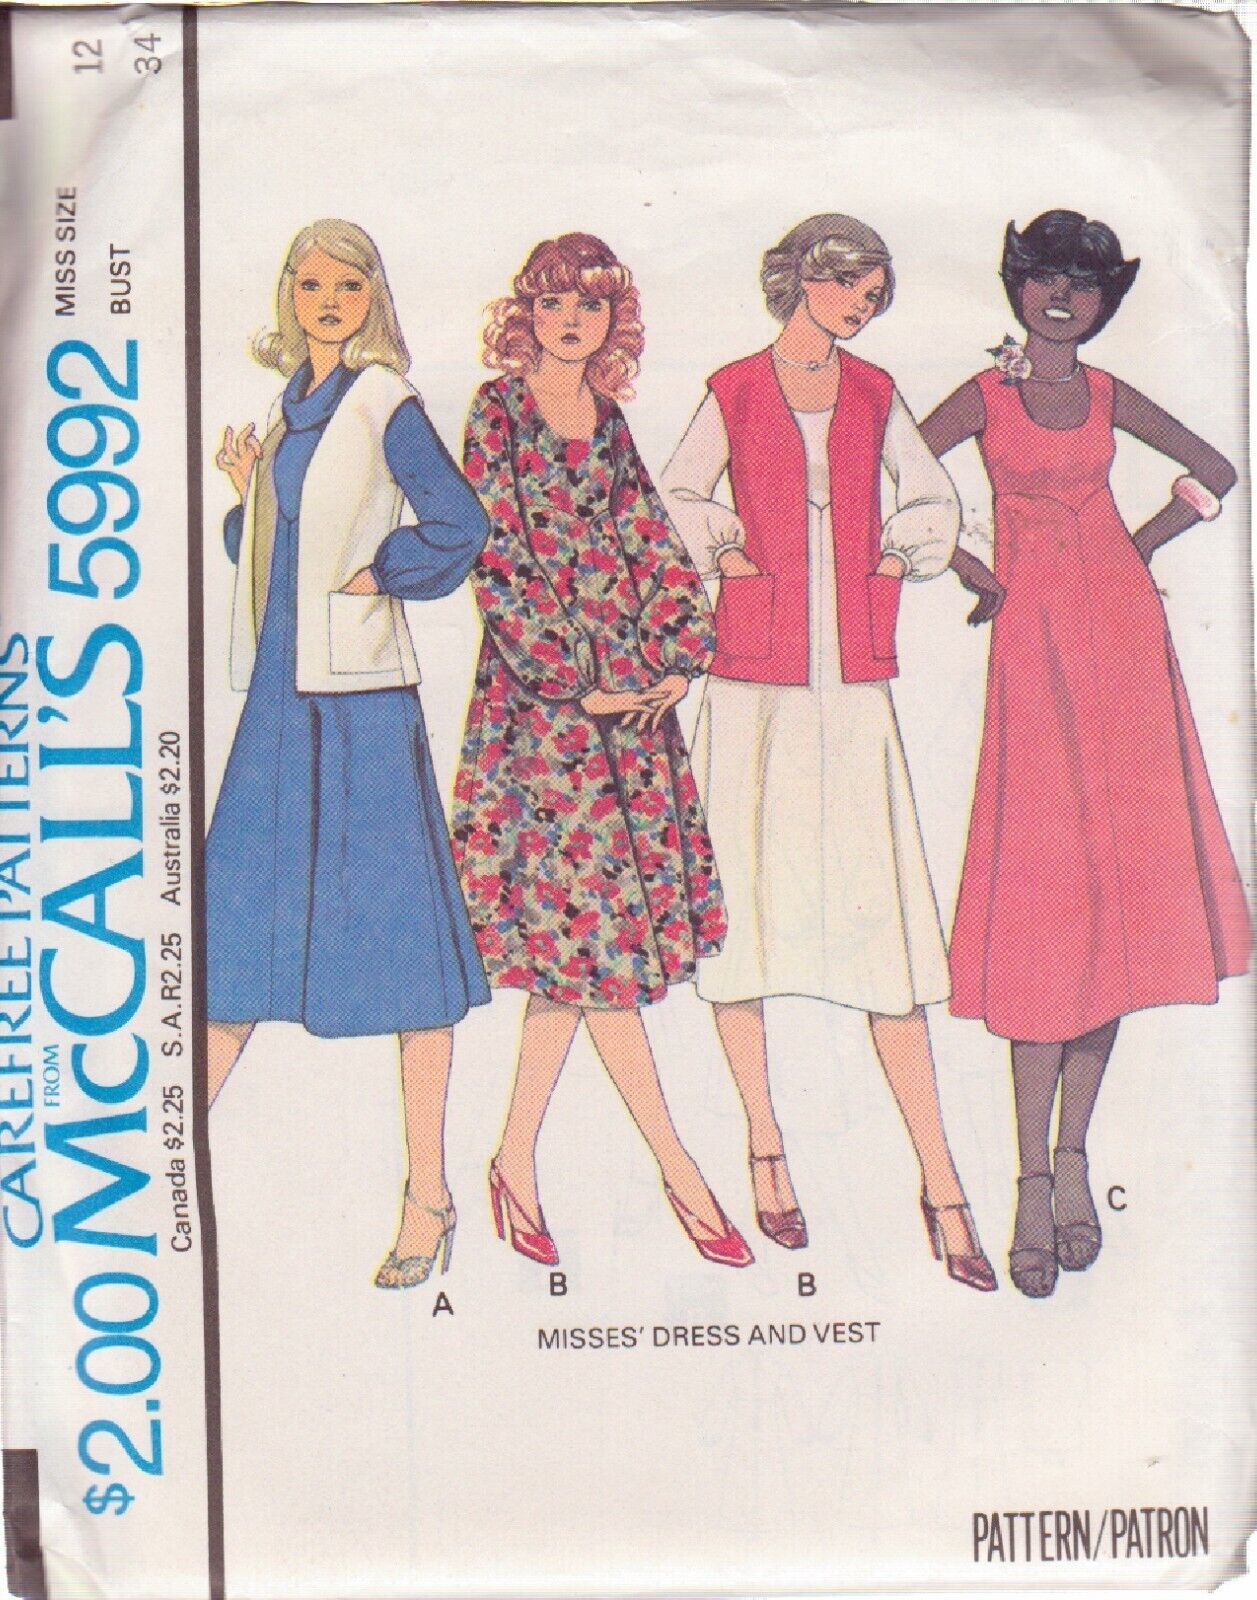 McCALL'S PATTERN 5992 SZ 12 MISSES' DRESS IN 3 VARIATIONS AND VEST UNCUT - $3.00